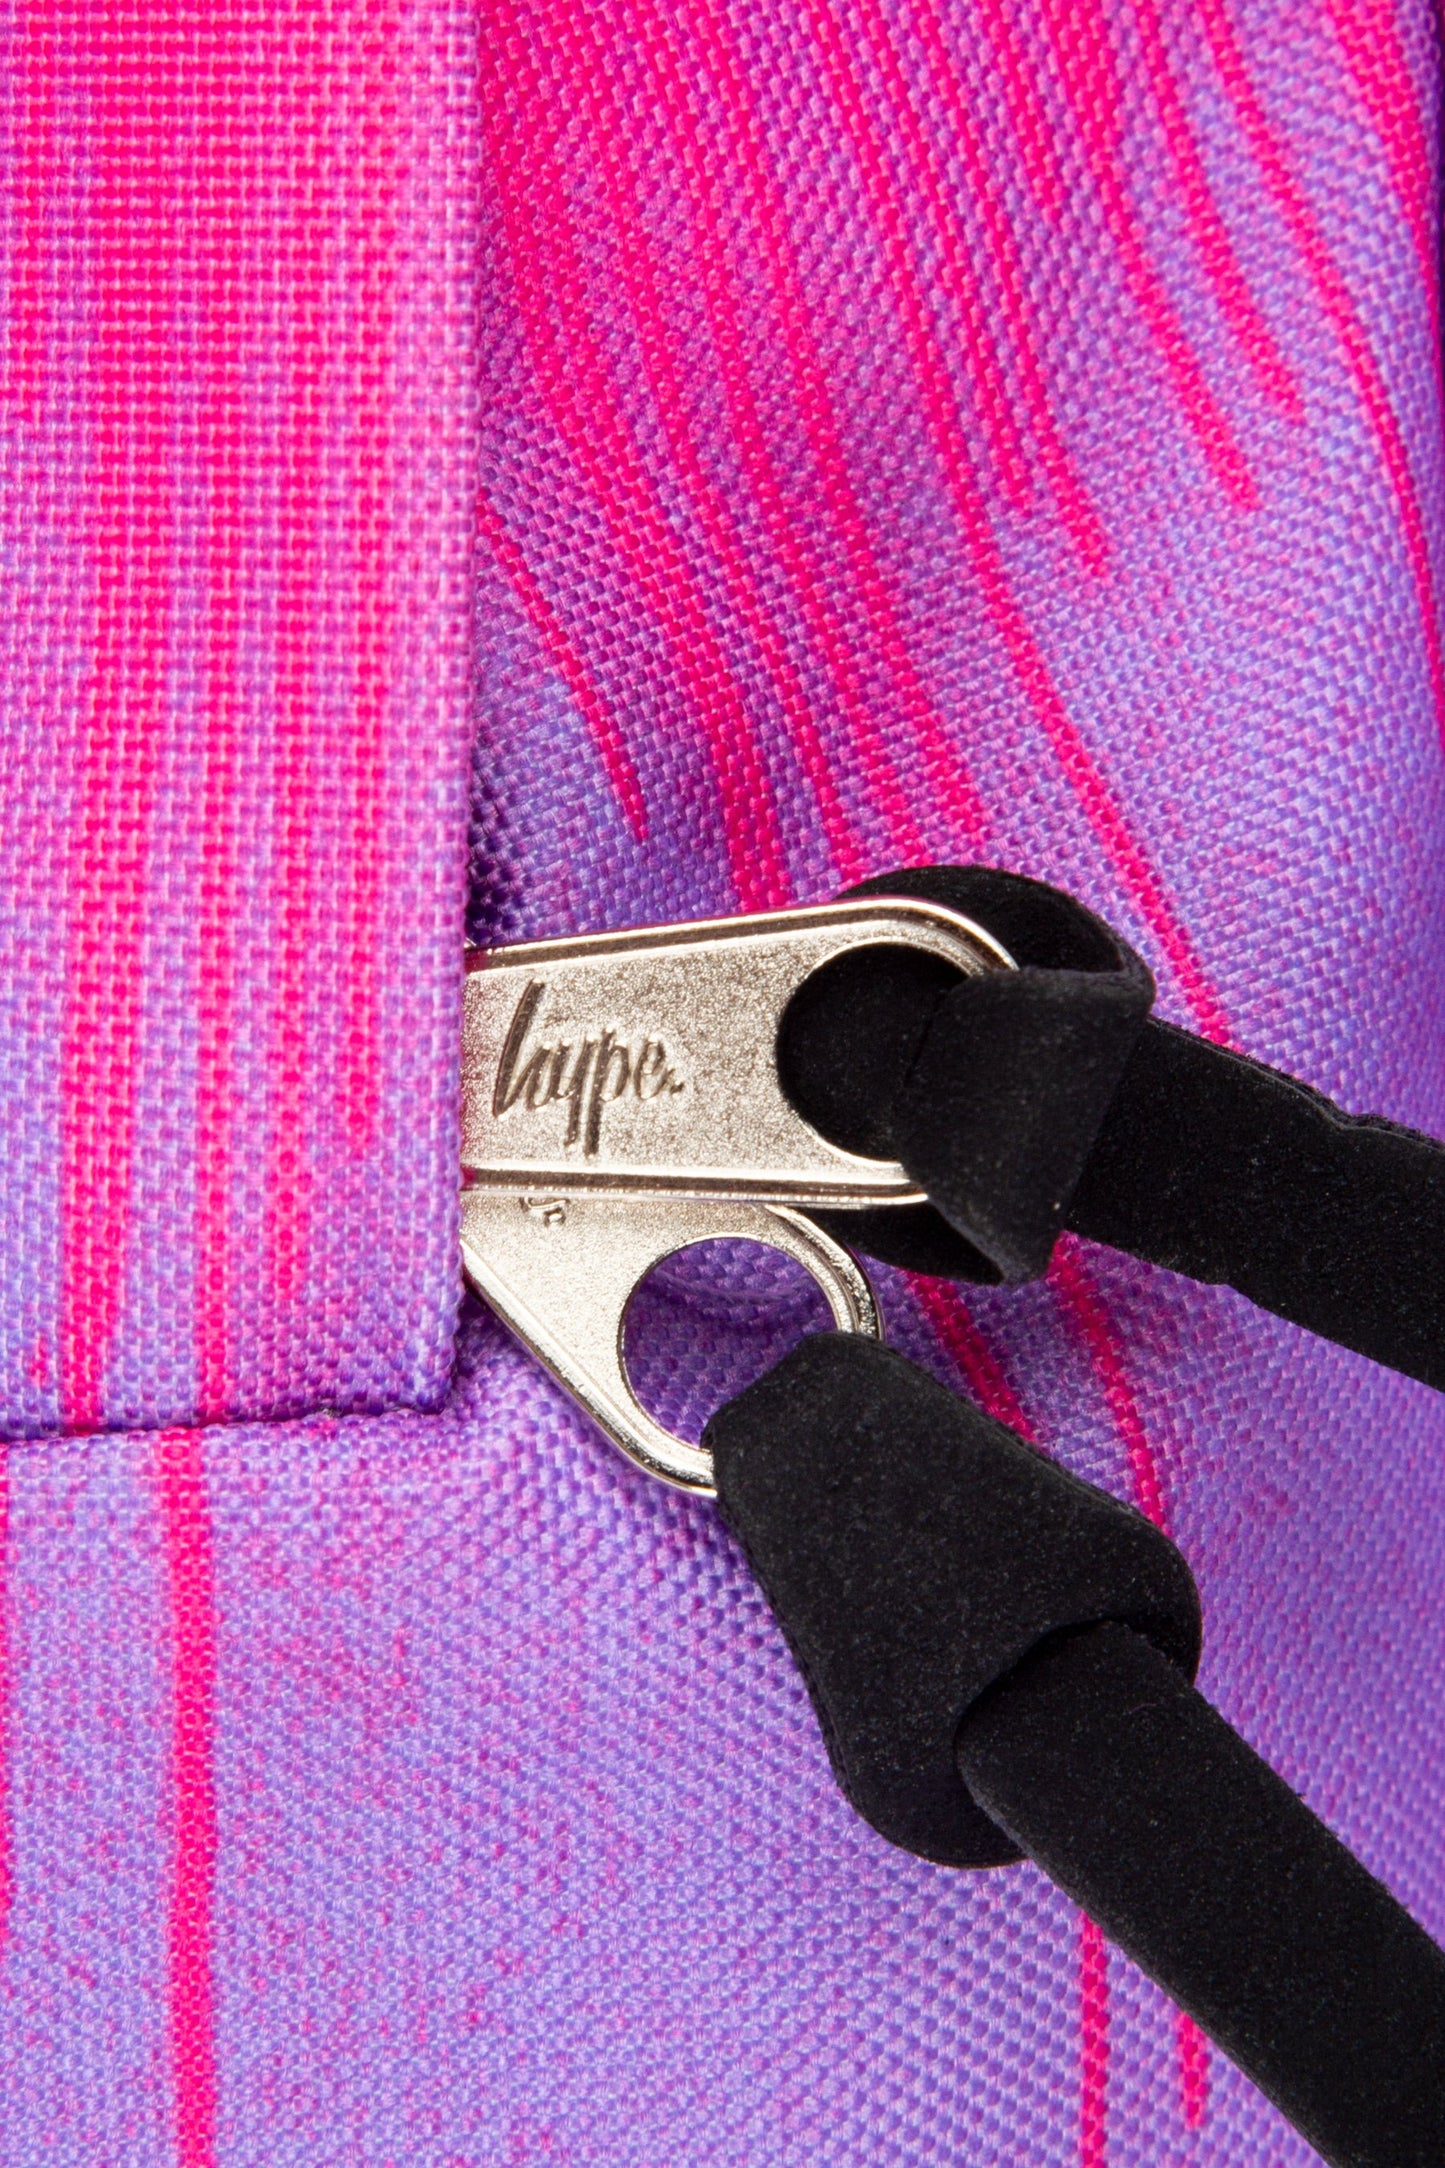 HYPE PINK & LILAC DRIPS BACKPACK